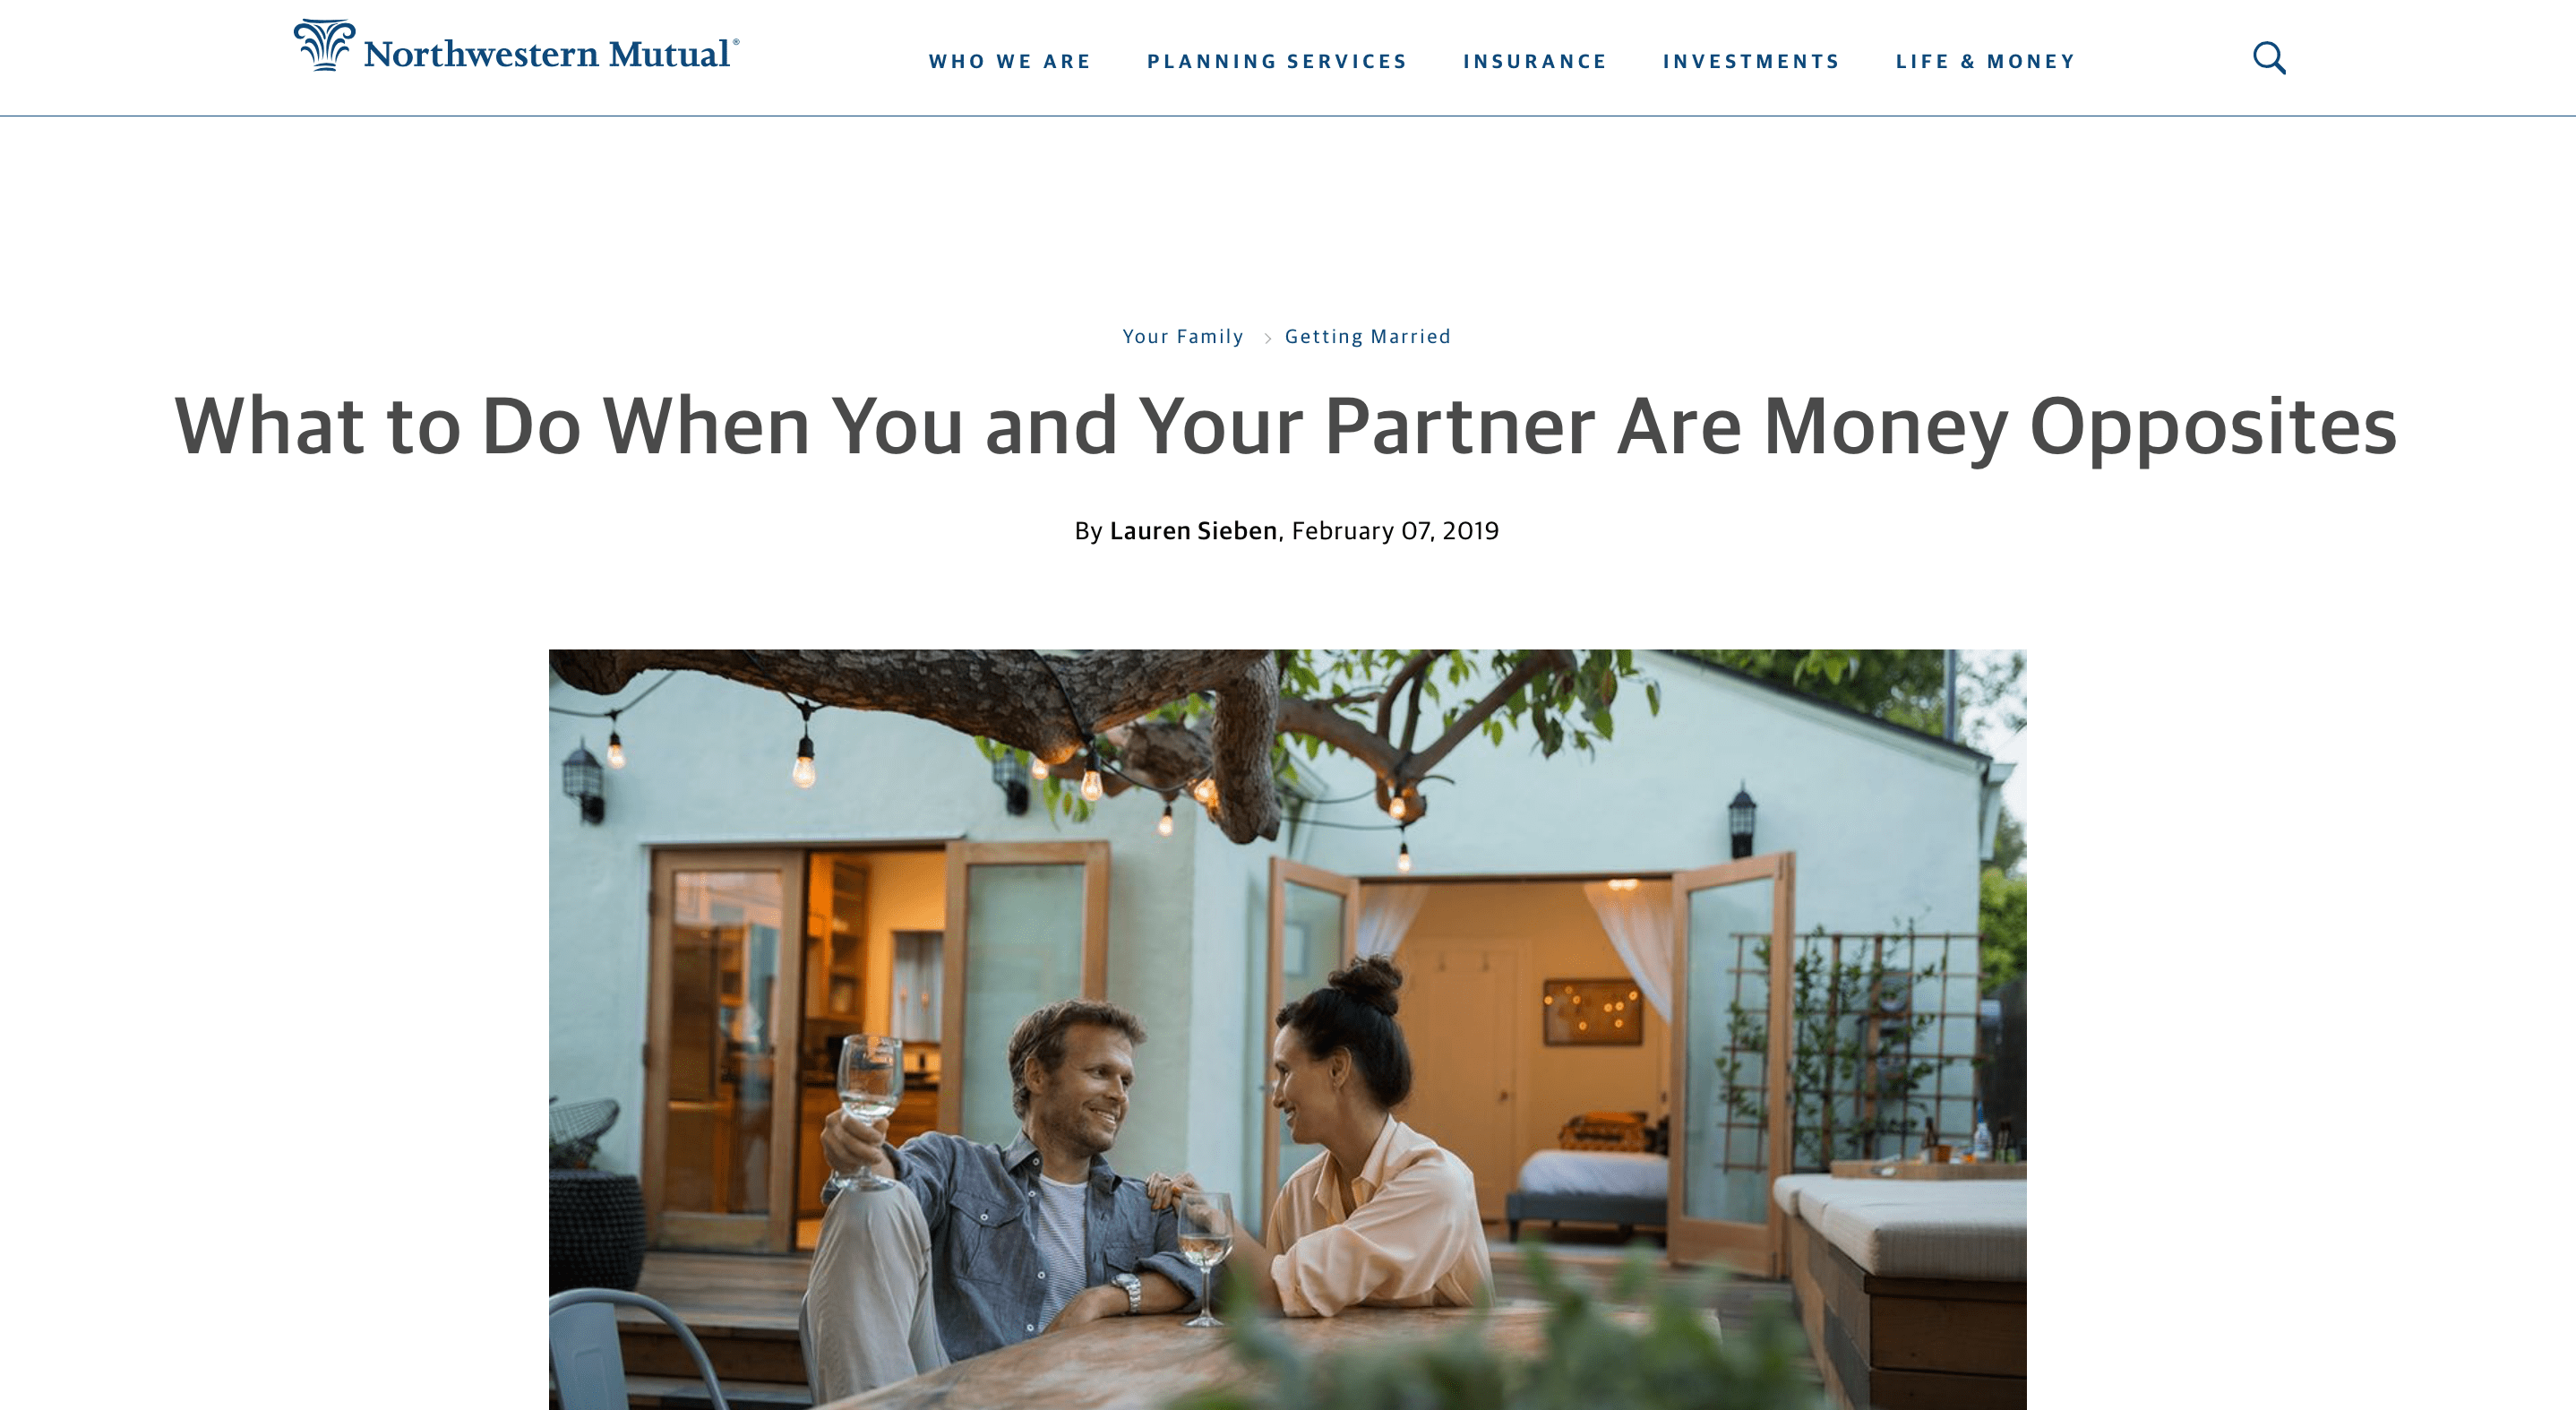 What to Do When You and Your Partner Are Money Opposites (Northwestern Mutual) | LPTG Quote